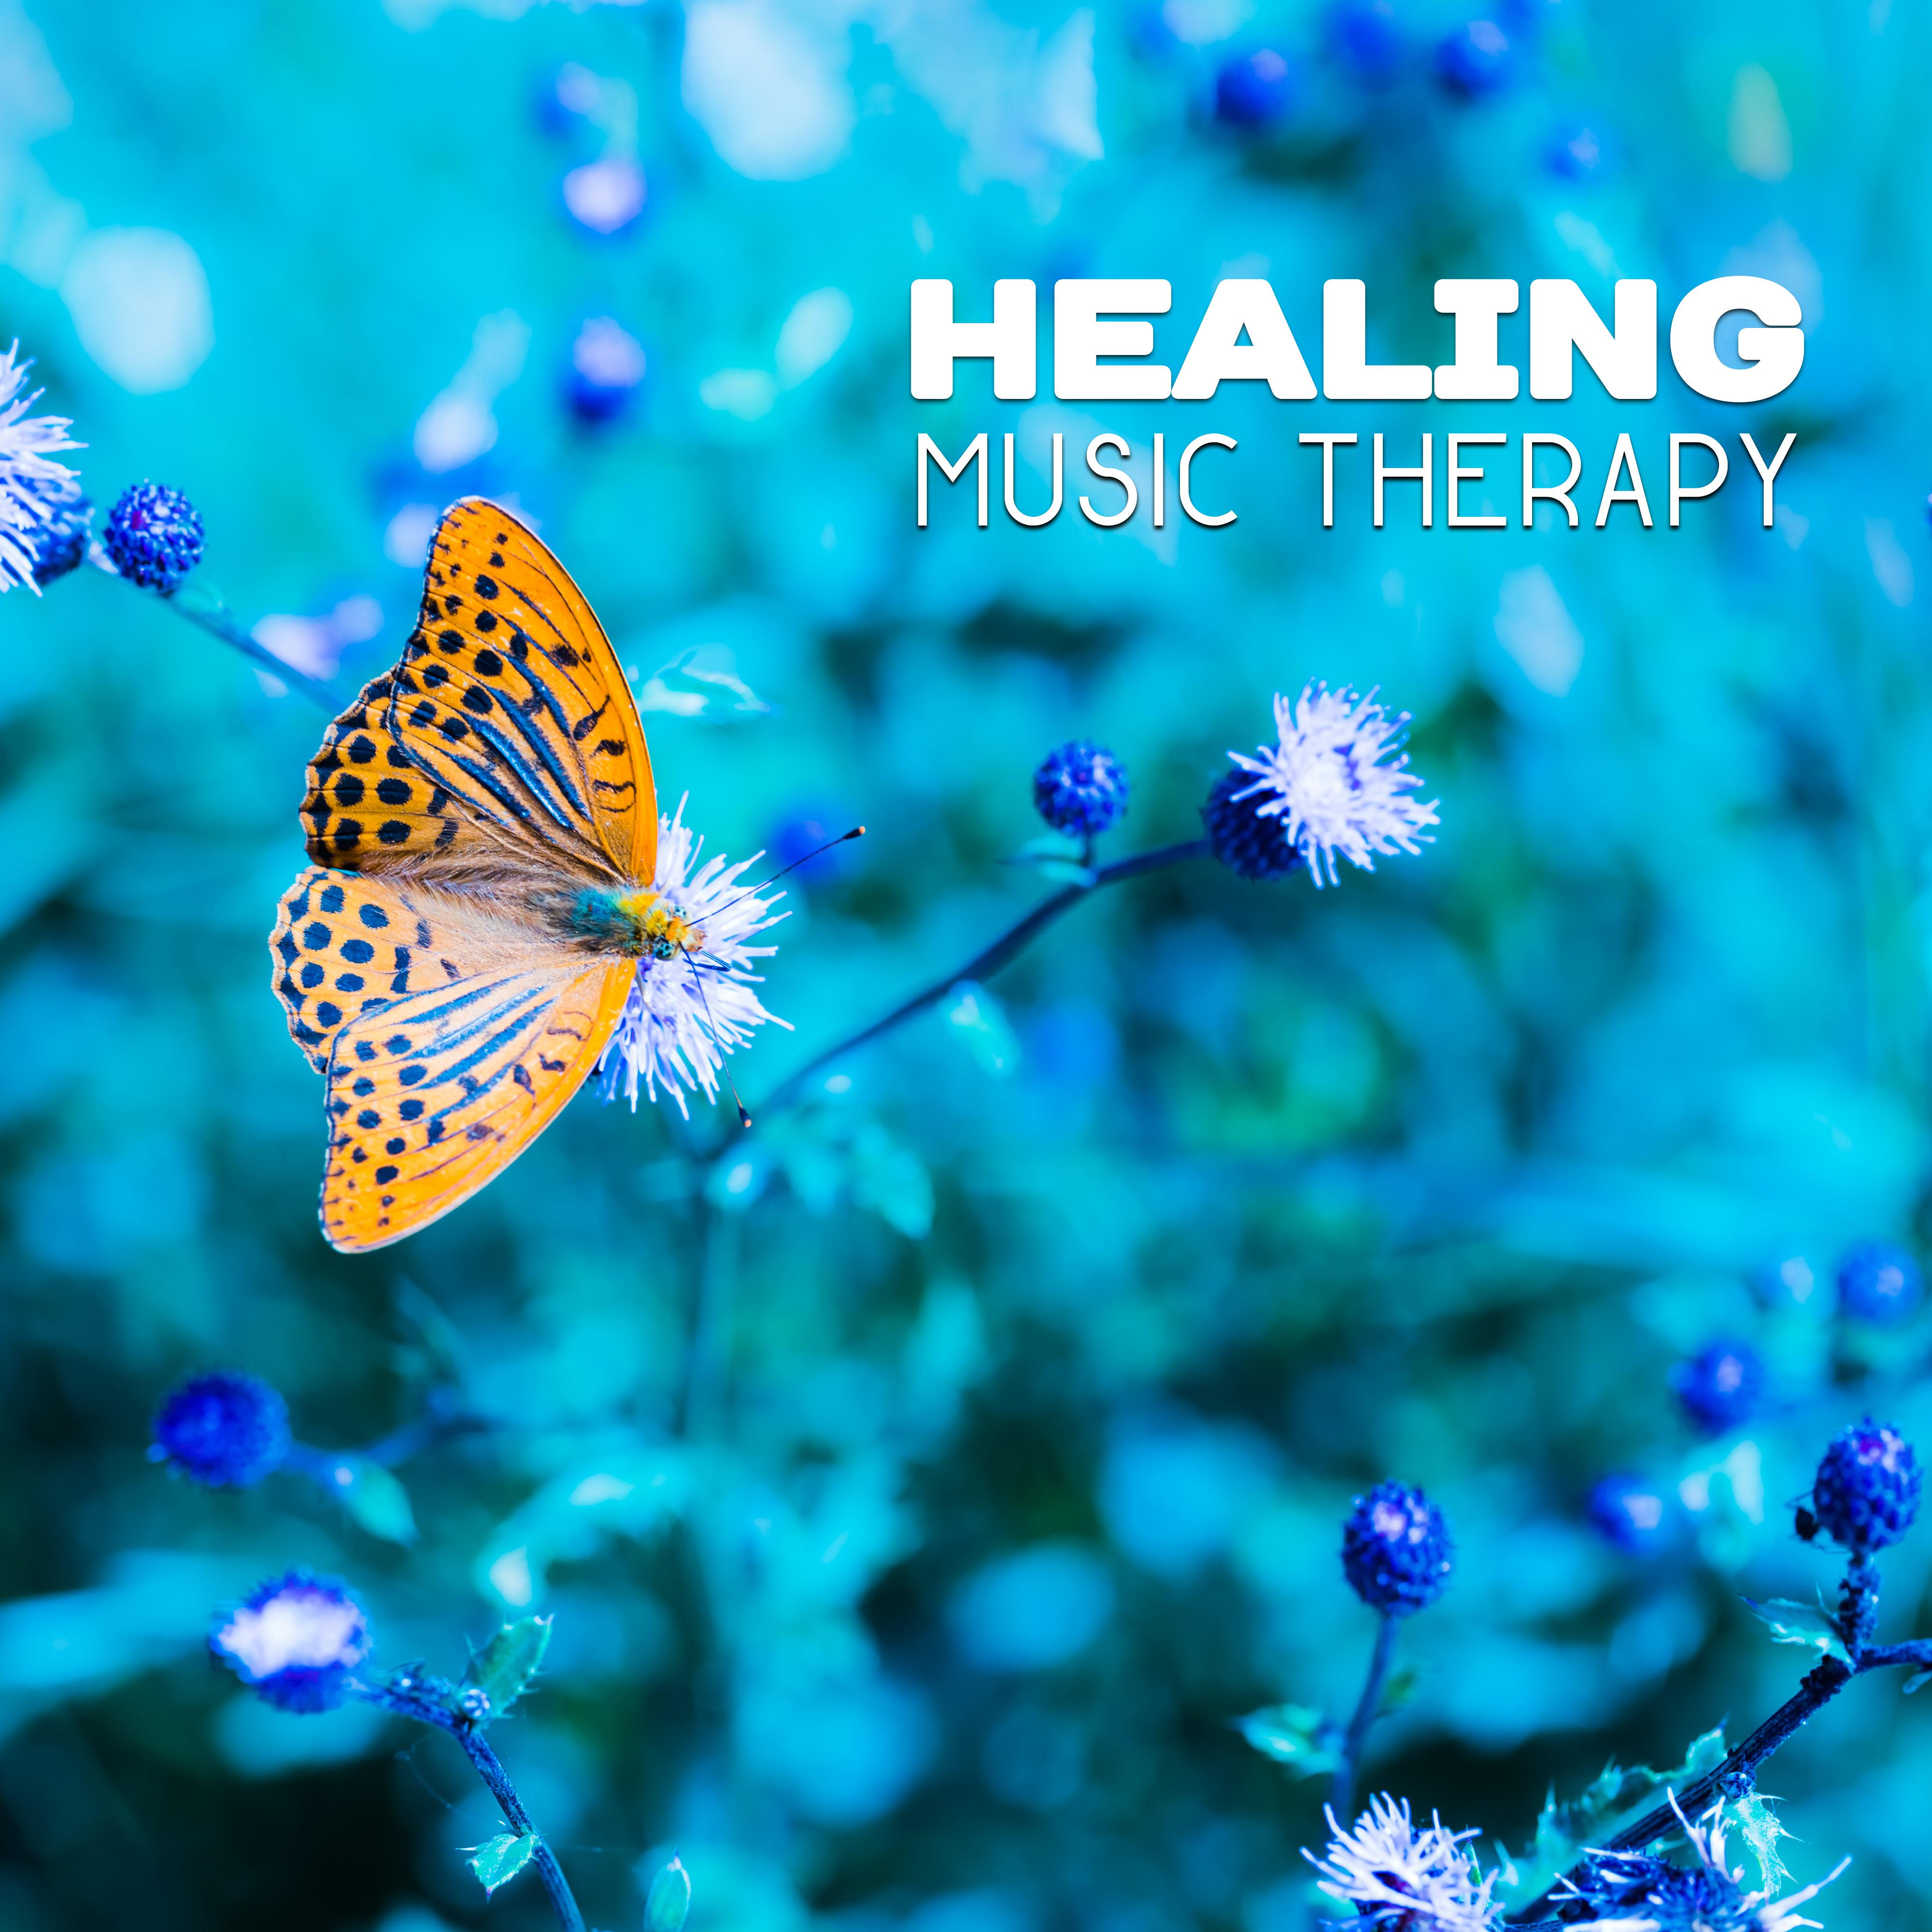 Healing Music Therapy  Relaxing Music Therapy, Rest, Stress Relief, Nature Sounds, Zen